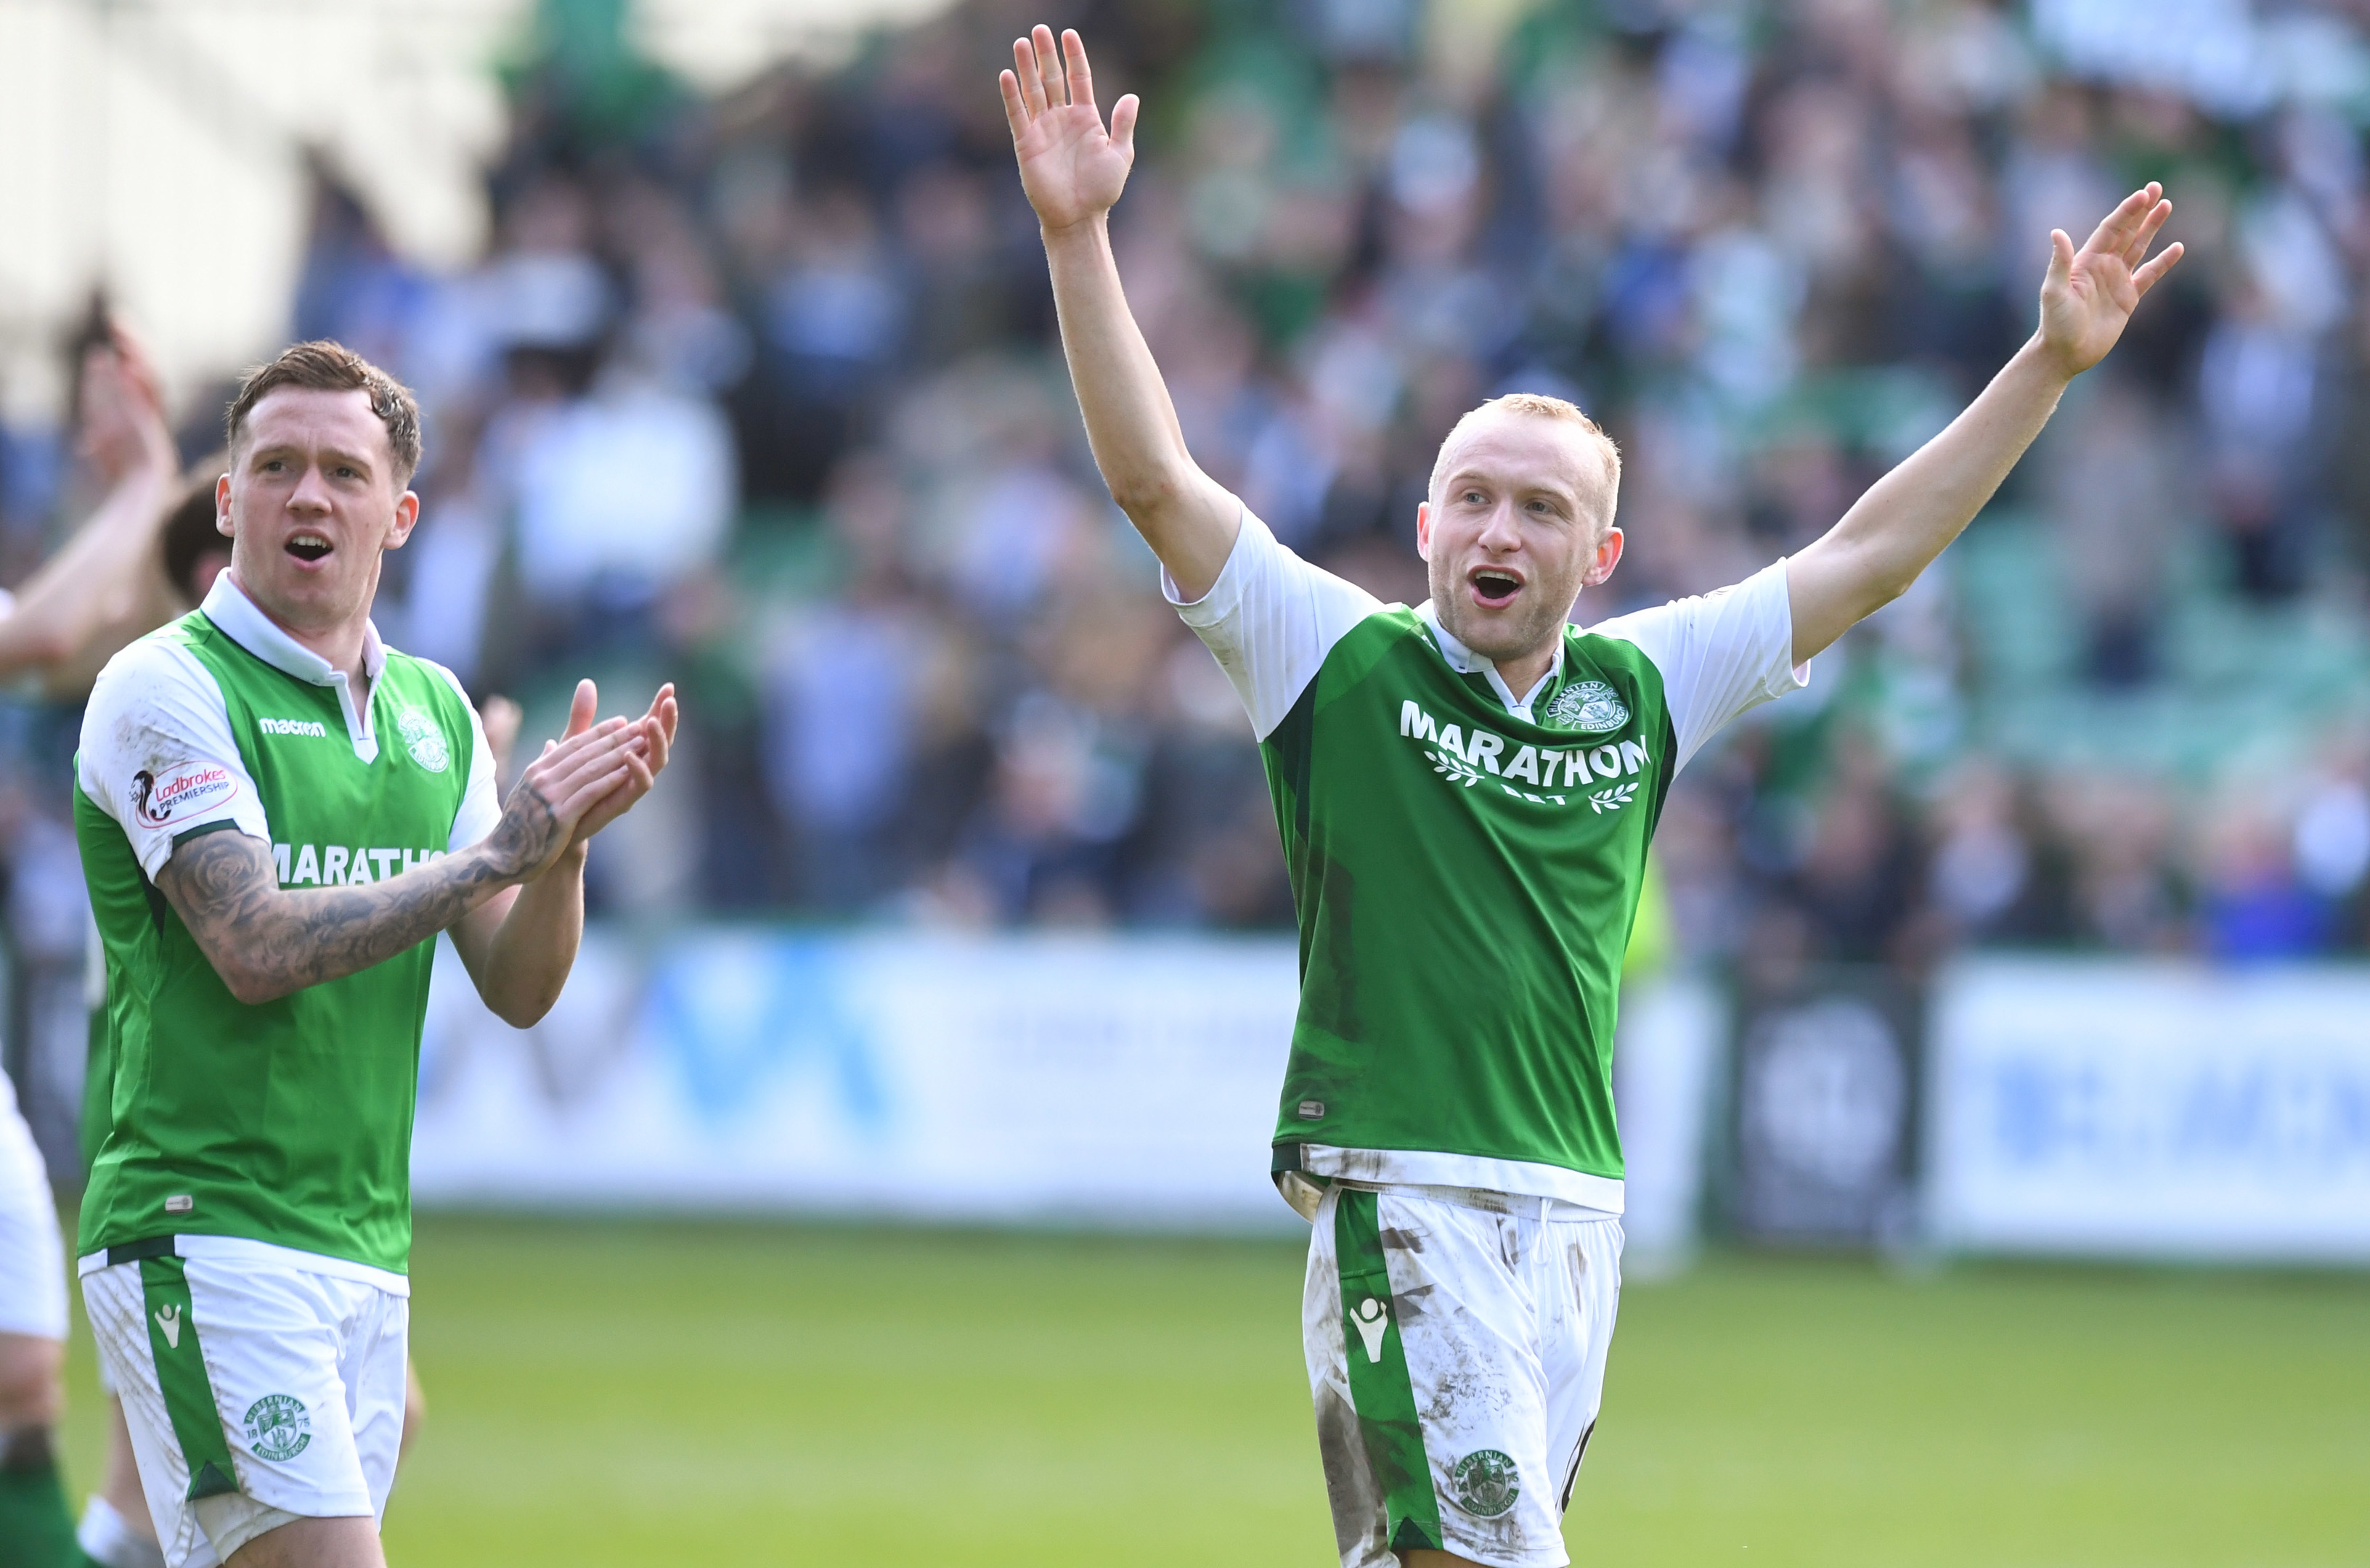 Hibs stars Danny Swanson (left) and Dylan McGeouch celebrate at full time (SNS Group / Craig Williamson)